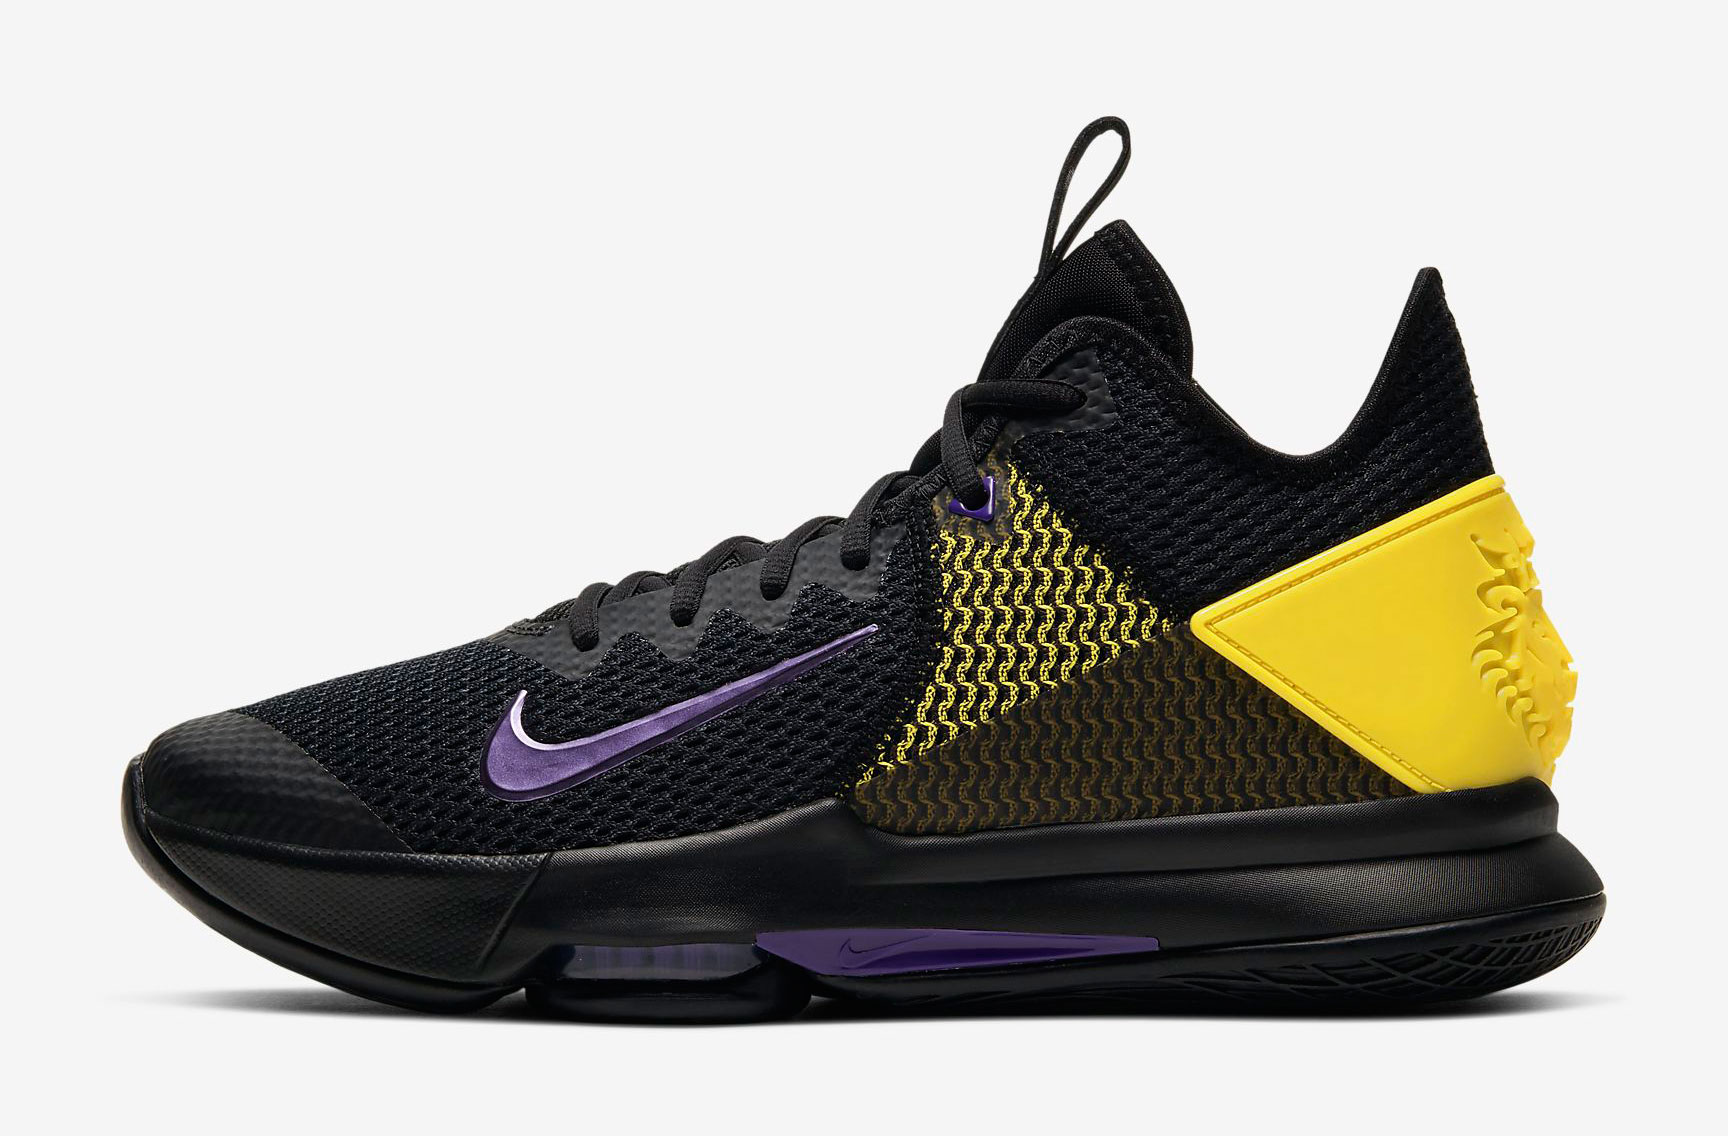 nike-lebron-witness-4-black-yellow-lakers-release-date